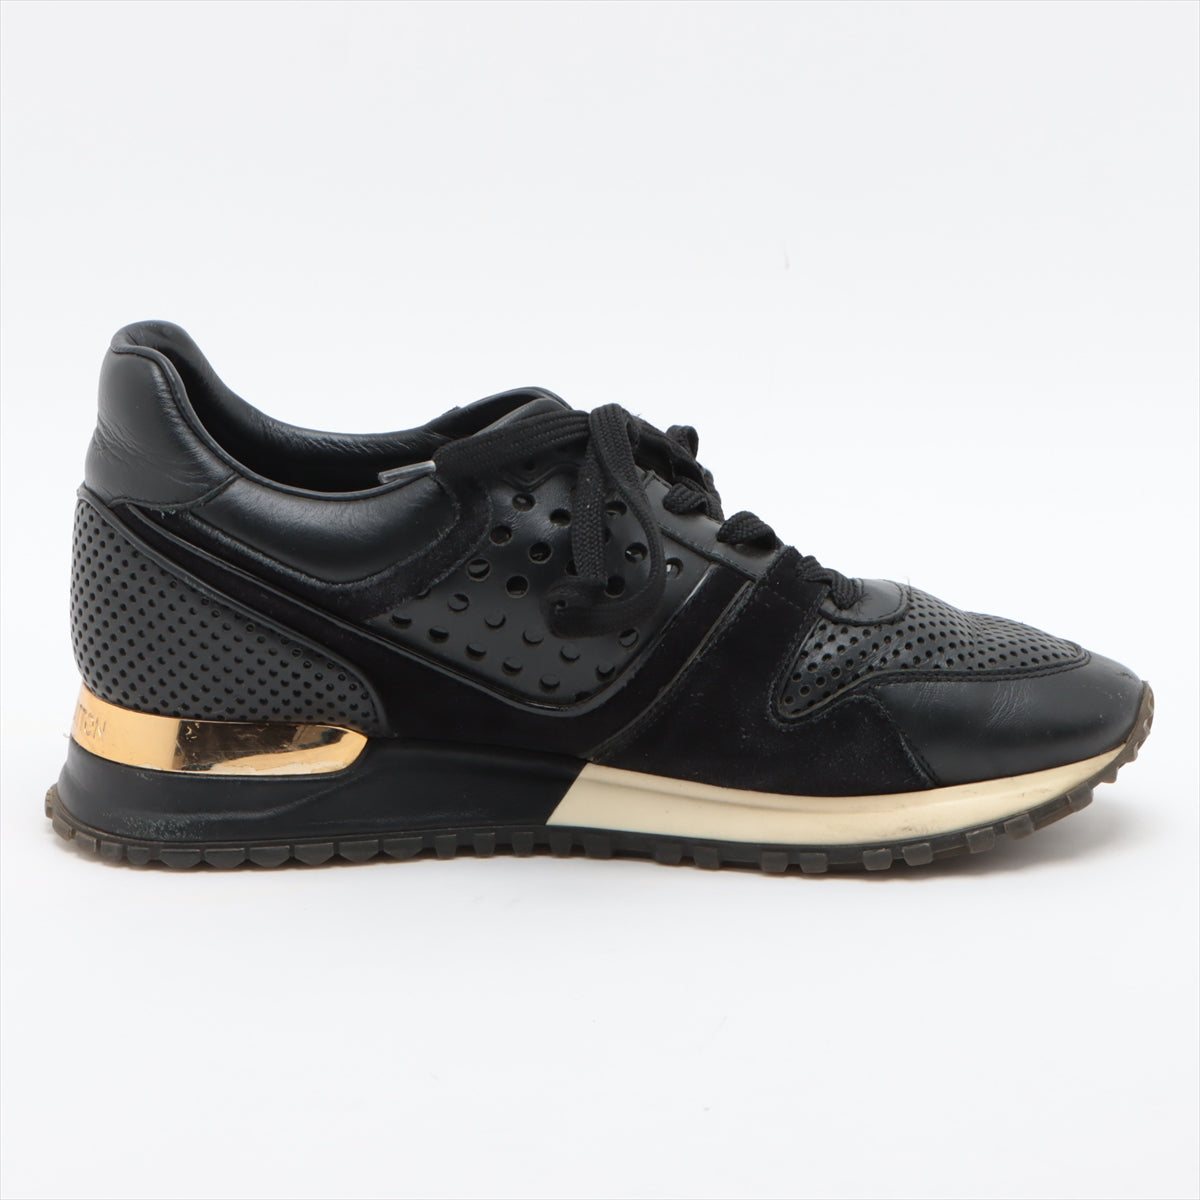 Louis Vuitton Runaway line 15 years Leather Sneakers 36 Ladies' Black GO0175 toe thread There is dirt near the heel